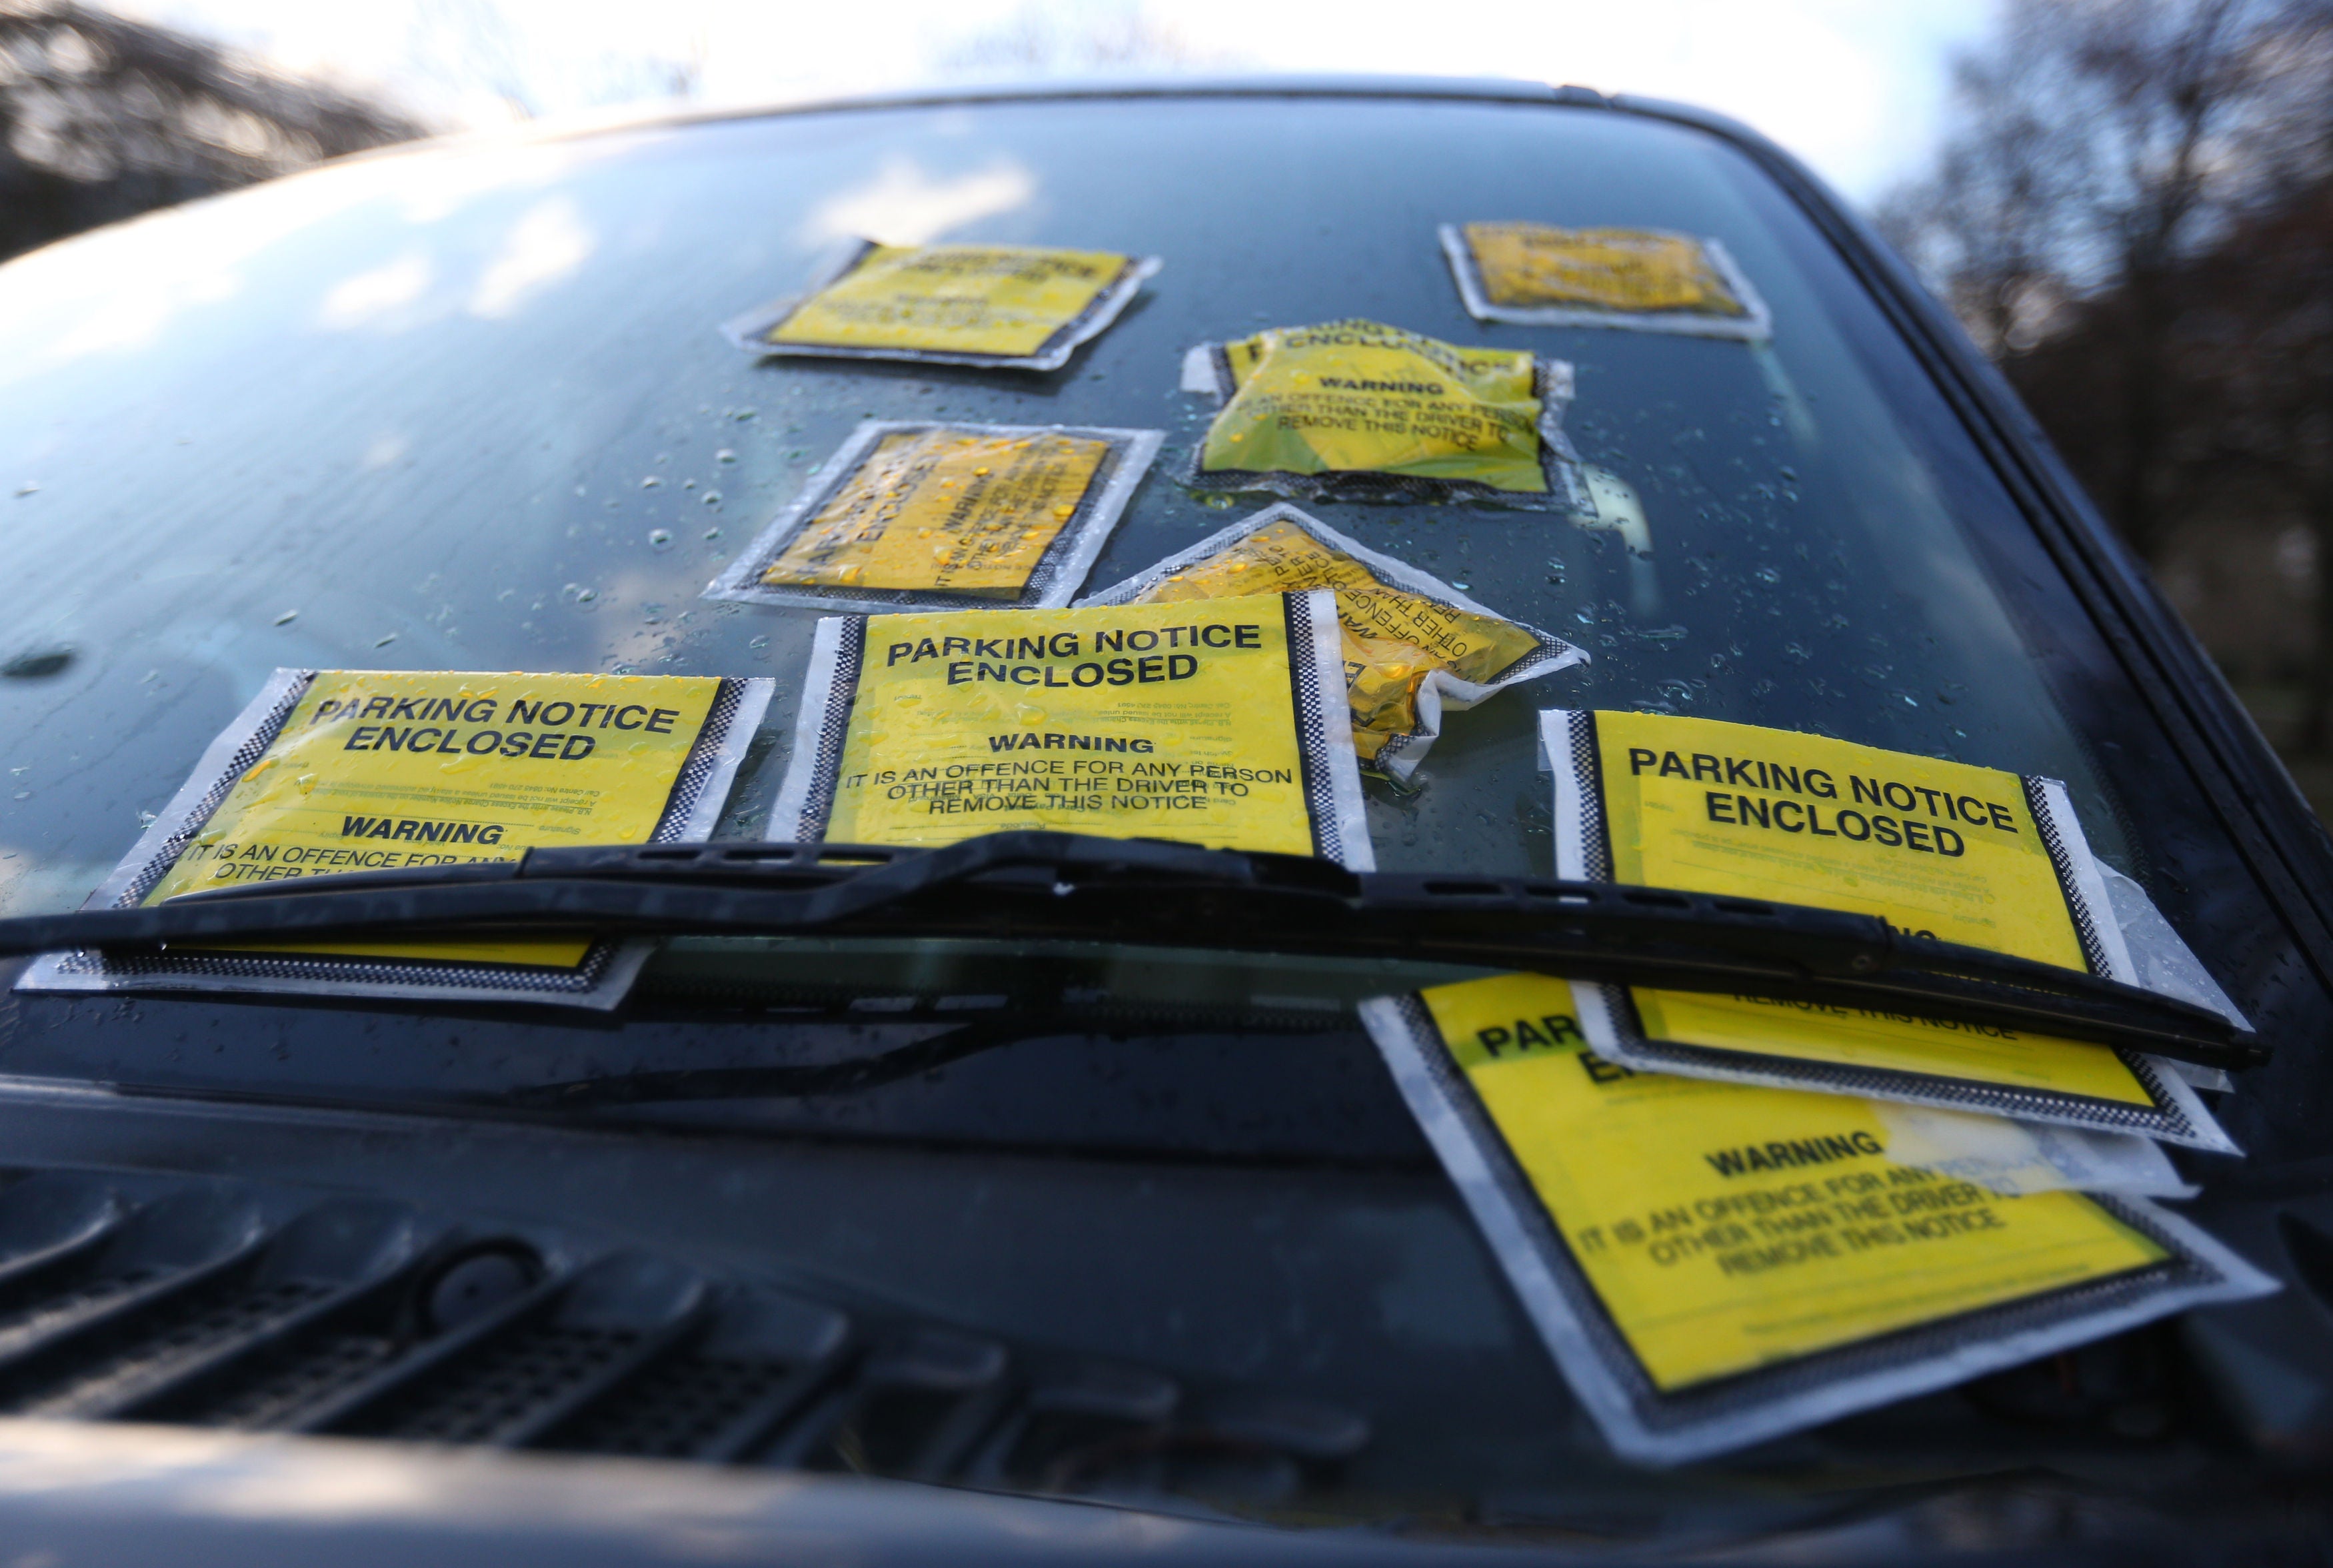 Higher financial penalties of £70 and £100 will remain for more serious breaches of the rules, such as parking in Blue Badge bays.